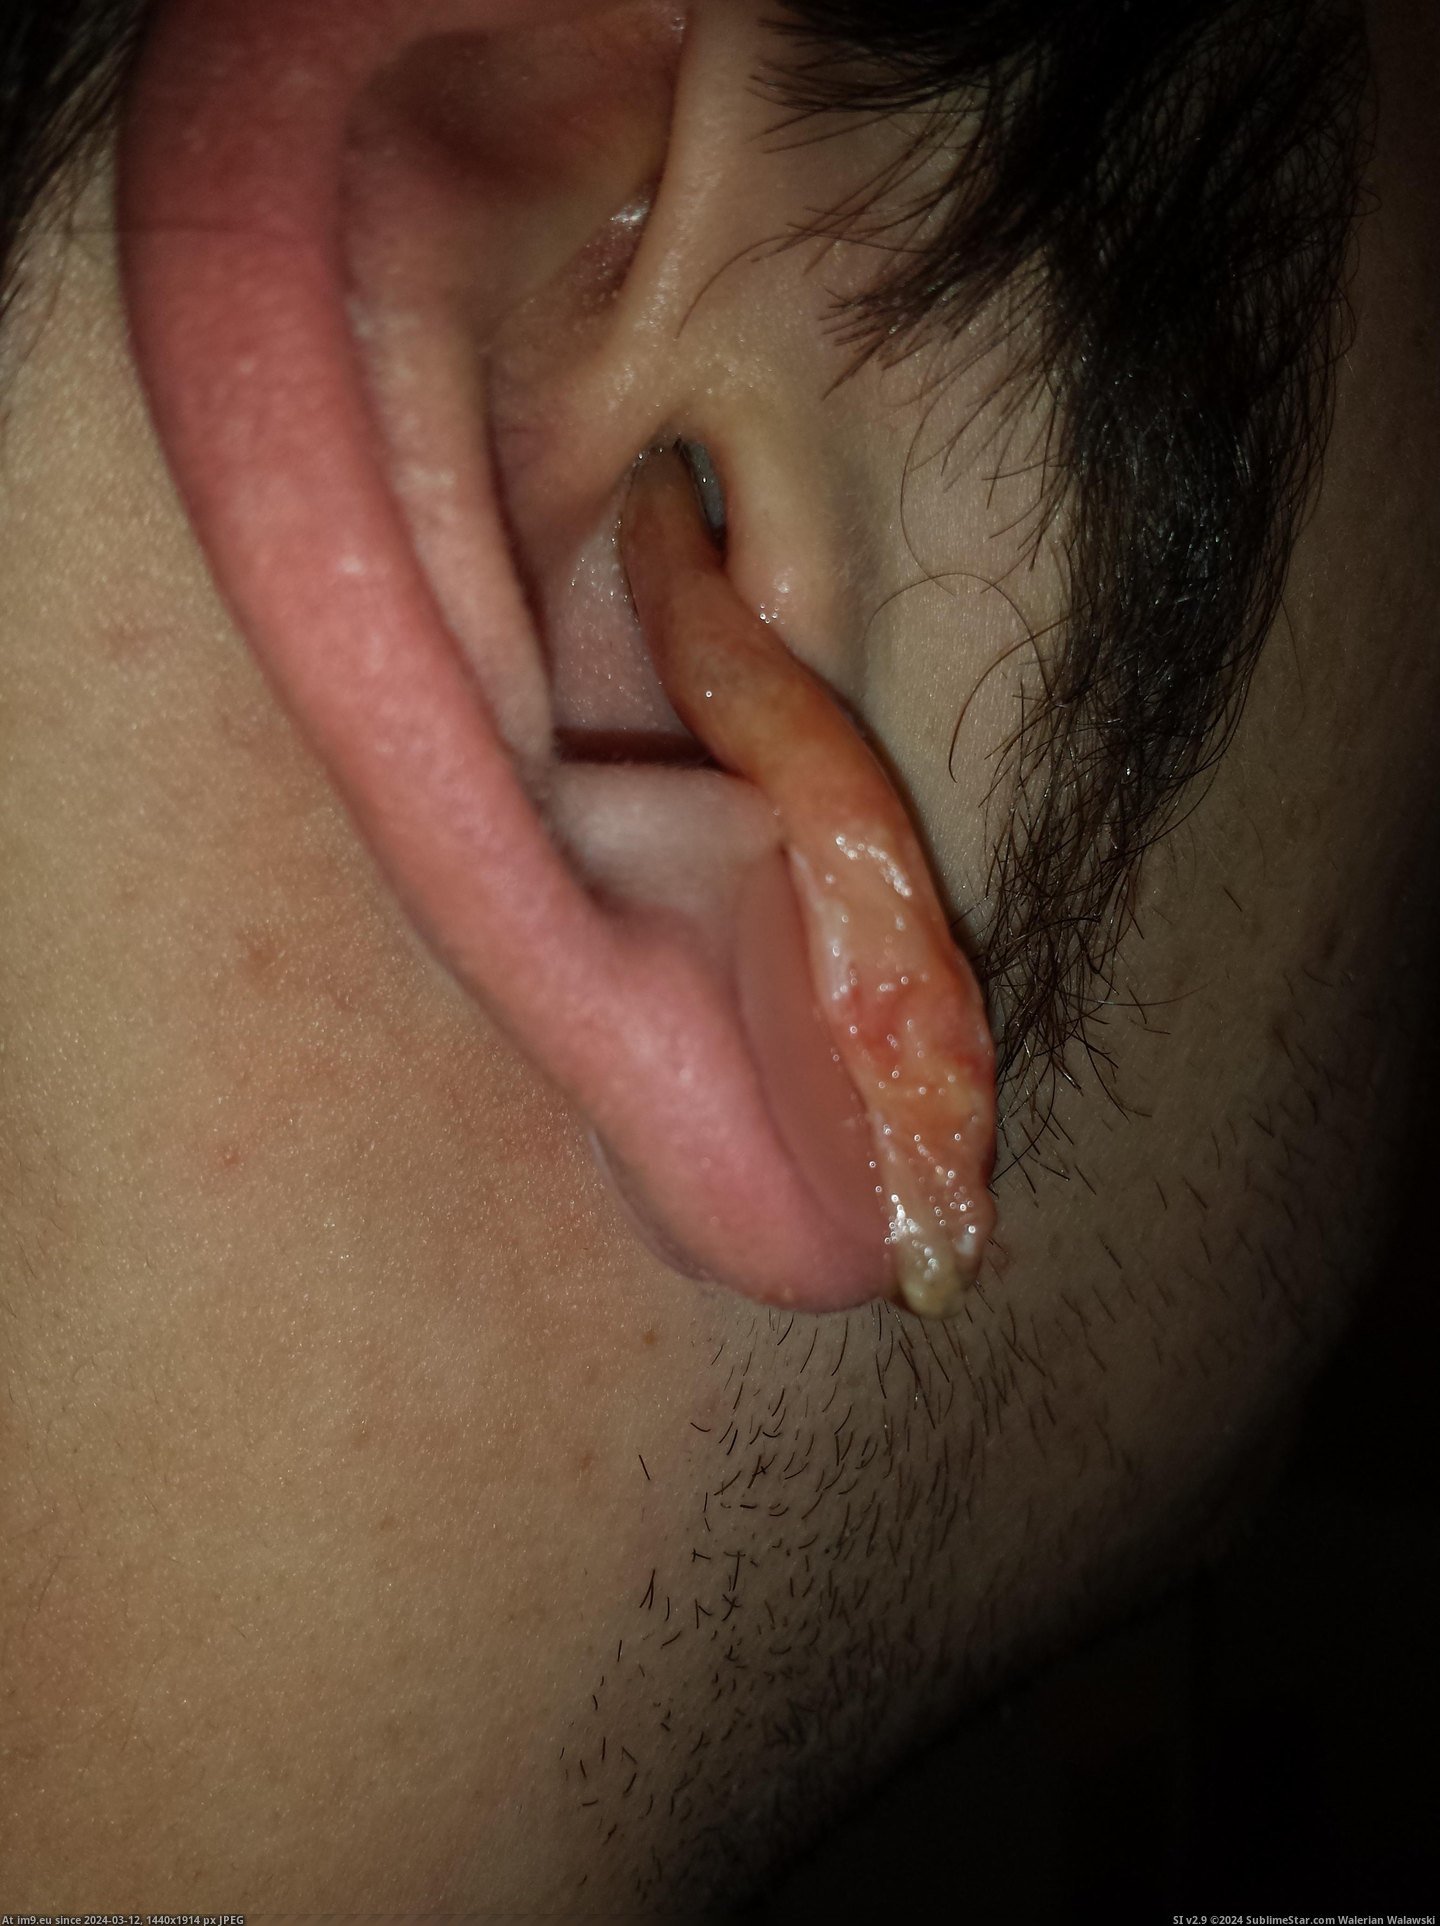 #Wtf #Ear #Infection #Crazy [Wtf] My crazy ear infection 2 Pic. (Image of album My r/WTF favs))